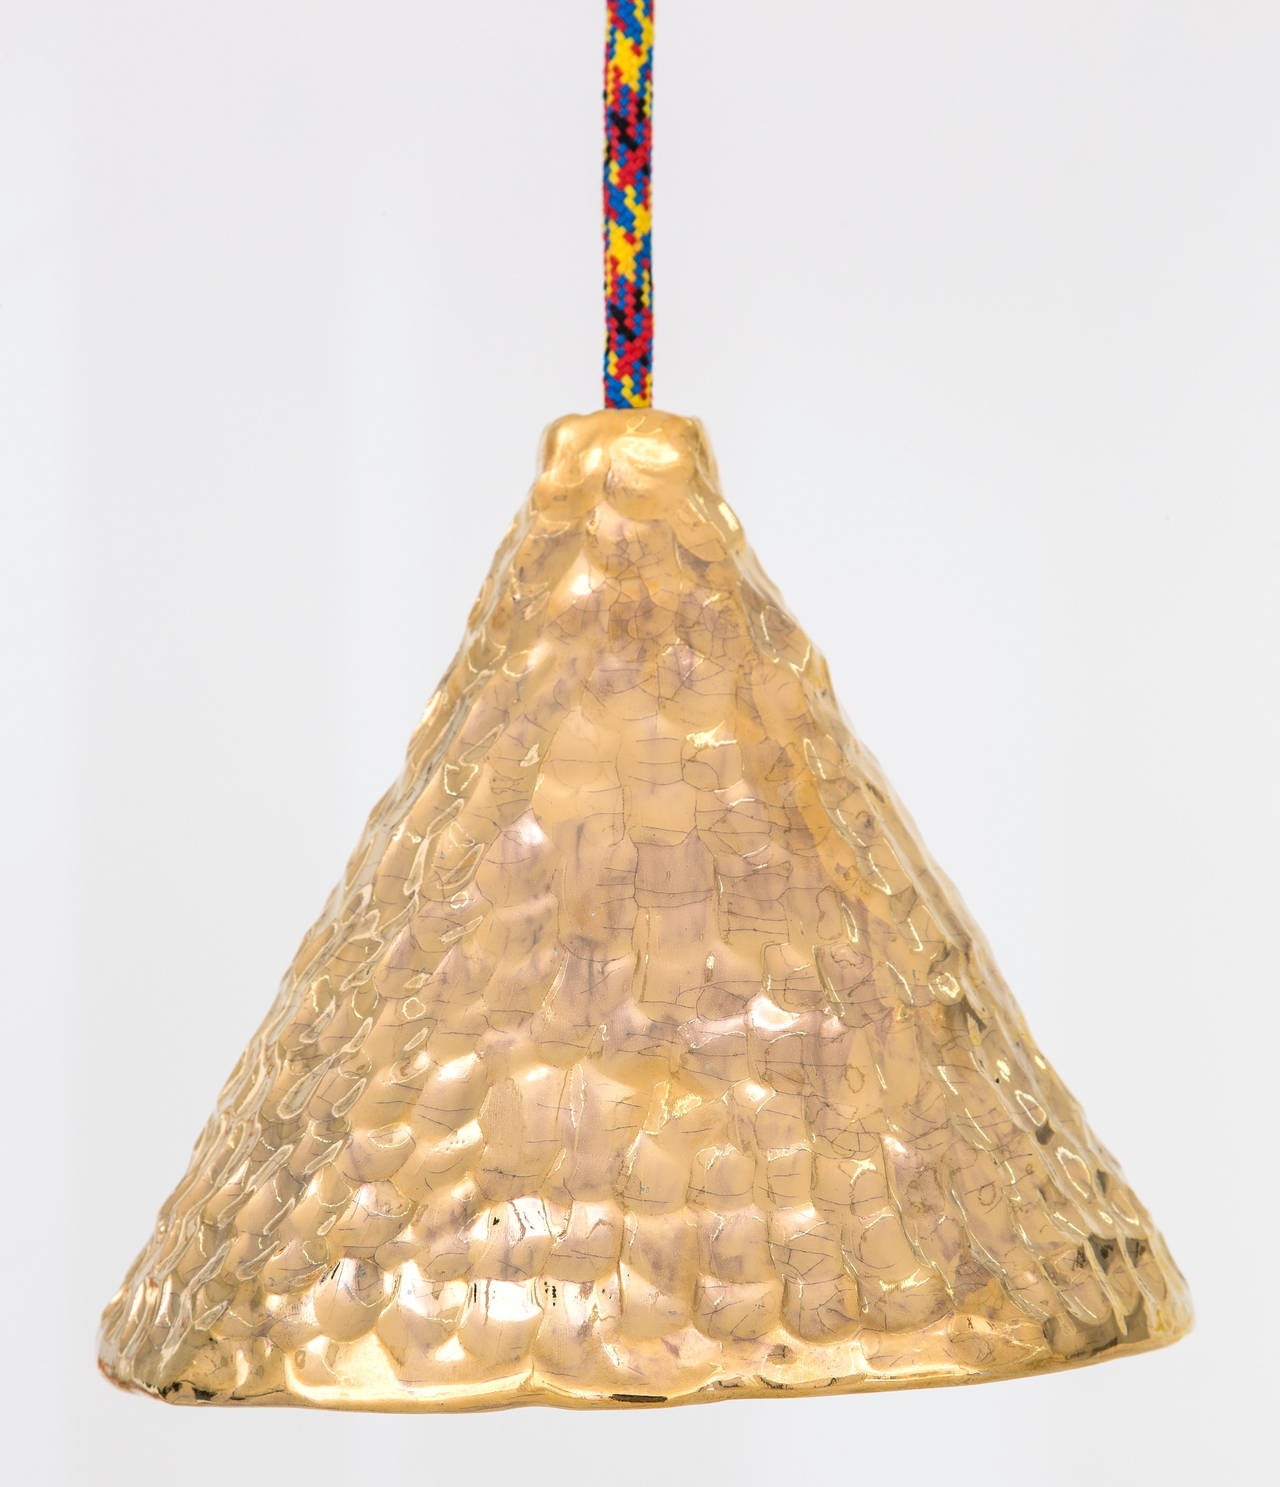 Gold Pendant (In collaboration with Sean Gerstley) - Contemporary Sculpture by Katie Stout